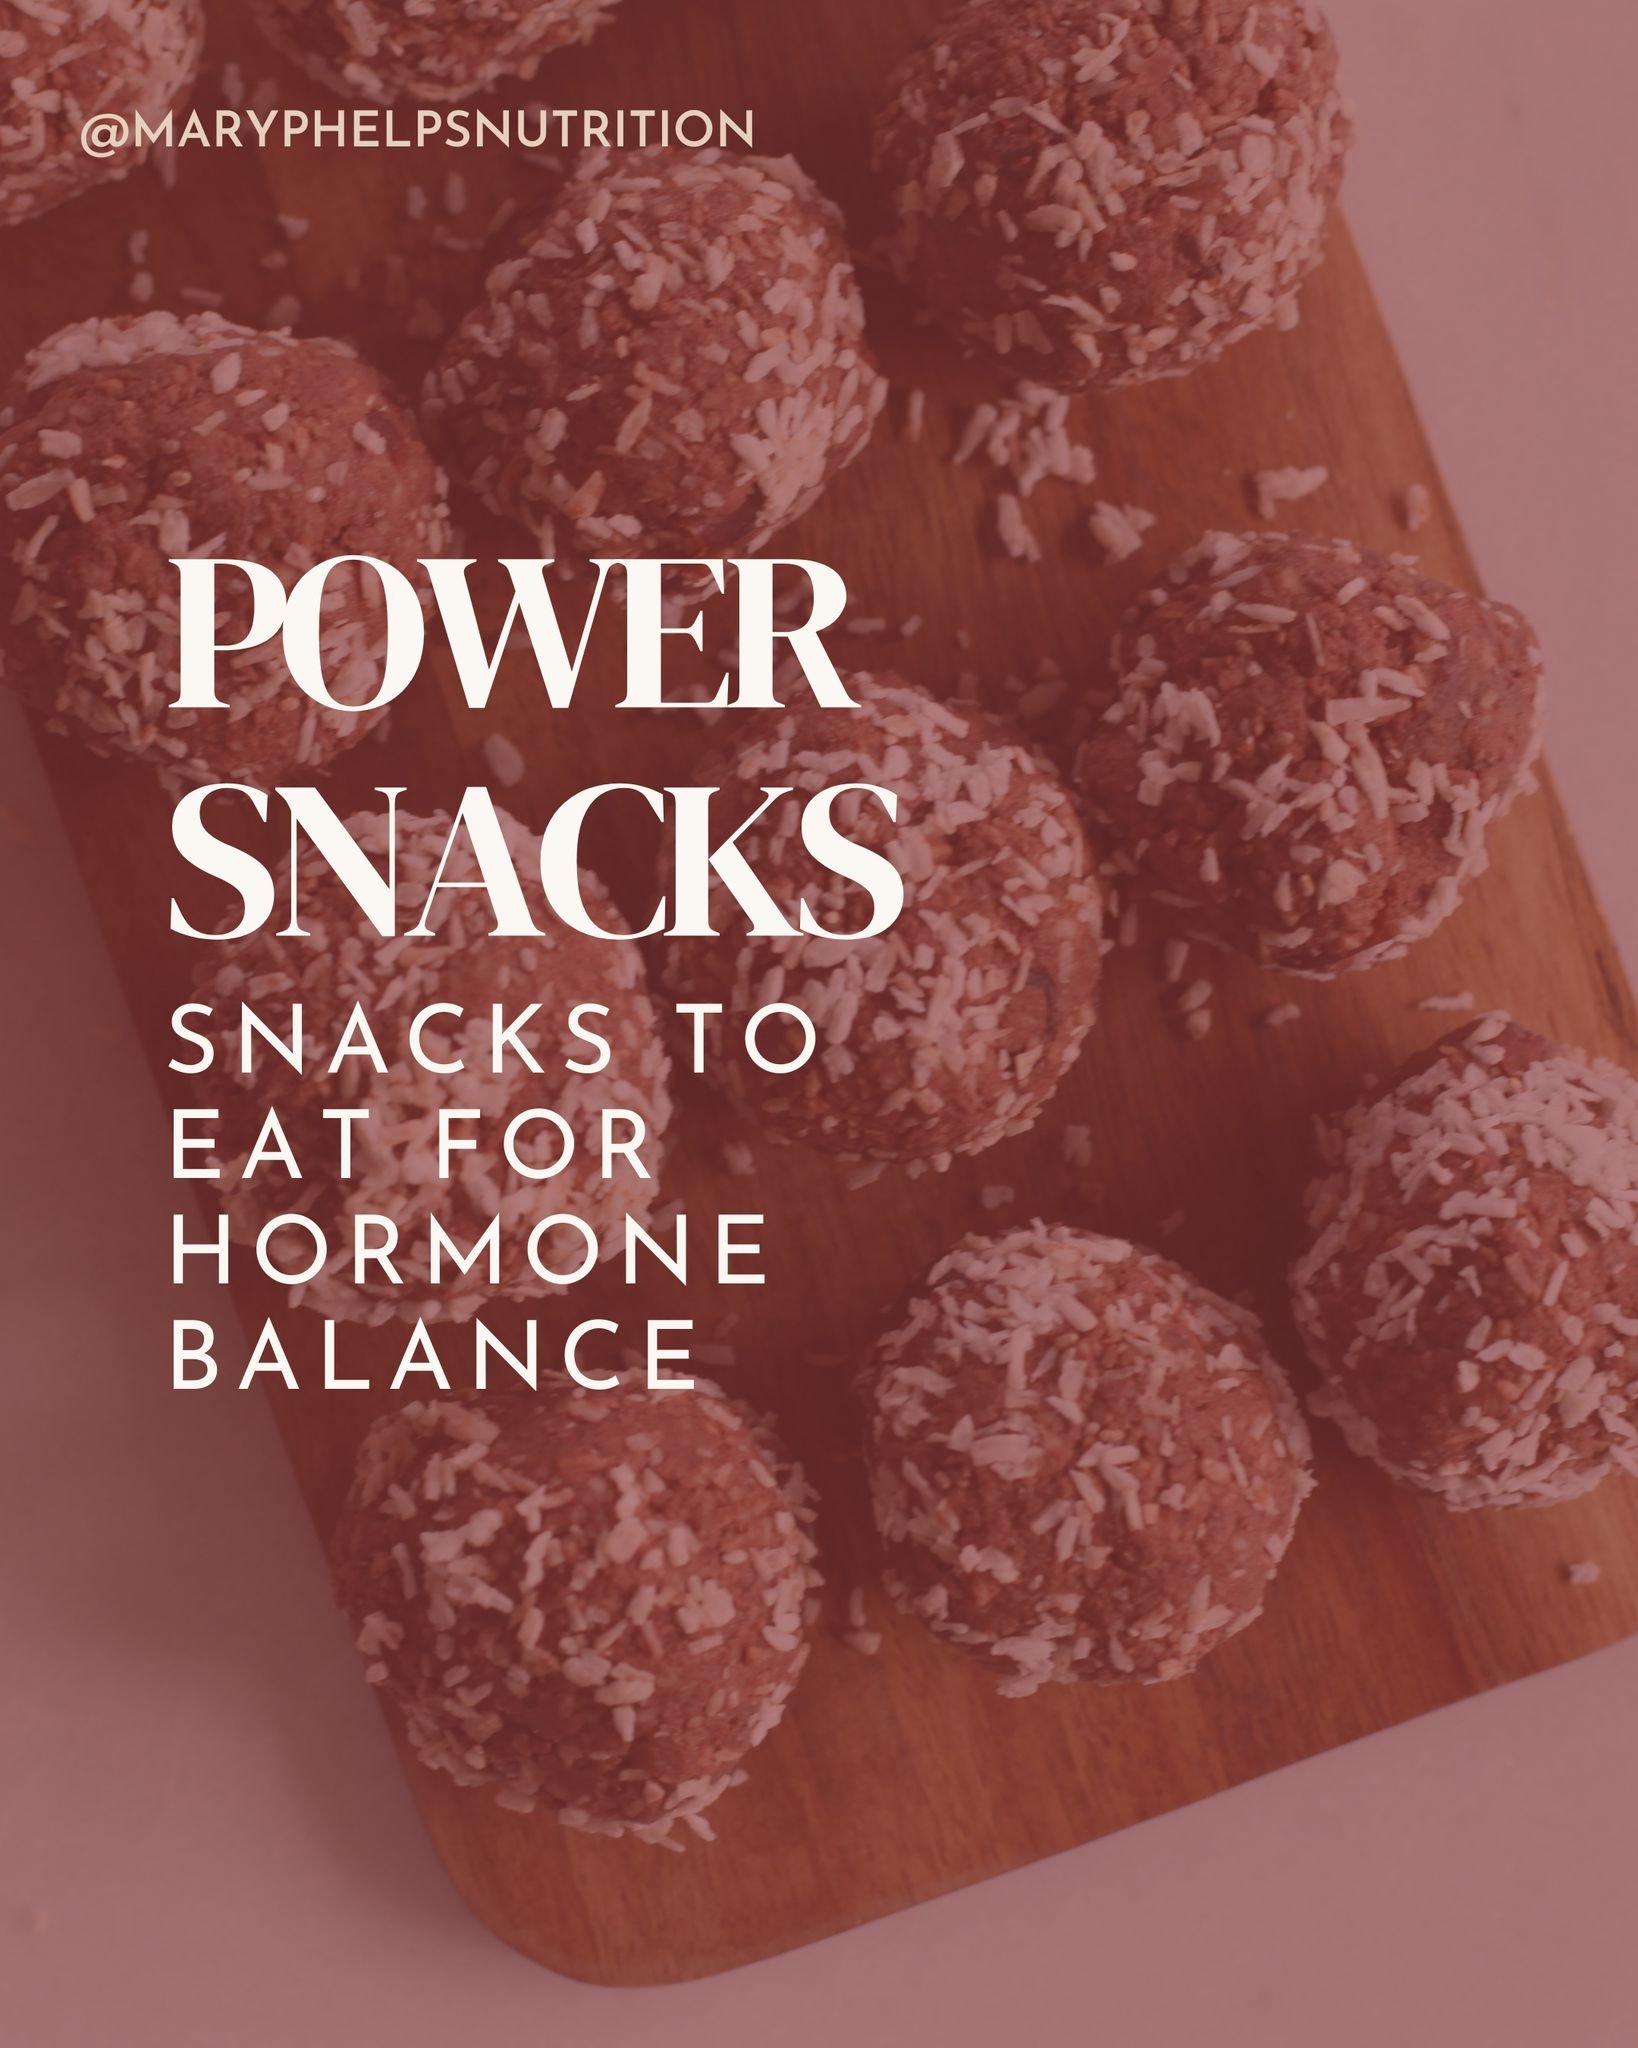 You are going to want to save these 🙌

Let's snack smarter, not harder, shall we? When you fuel your snacks with the right ingredients you don't have to give up satisfaction in the name of health. They can be both nourishing and delicious. 

When yo